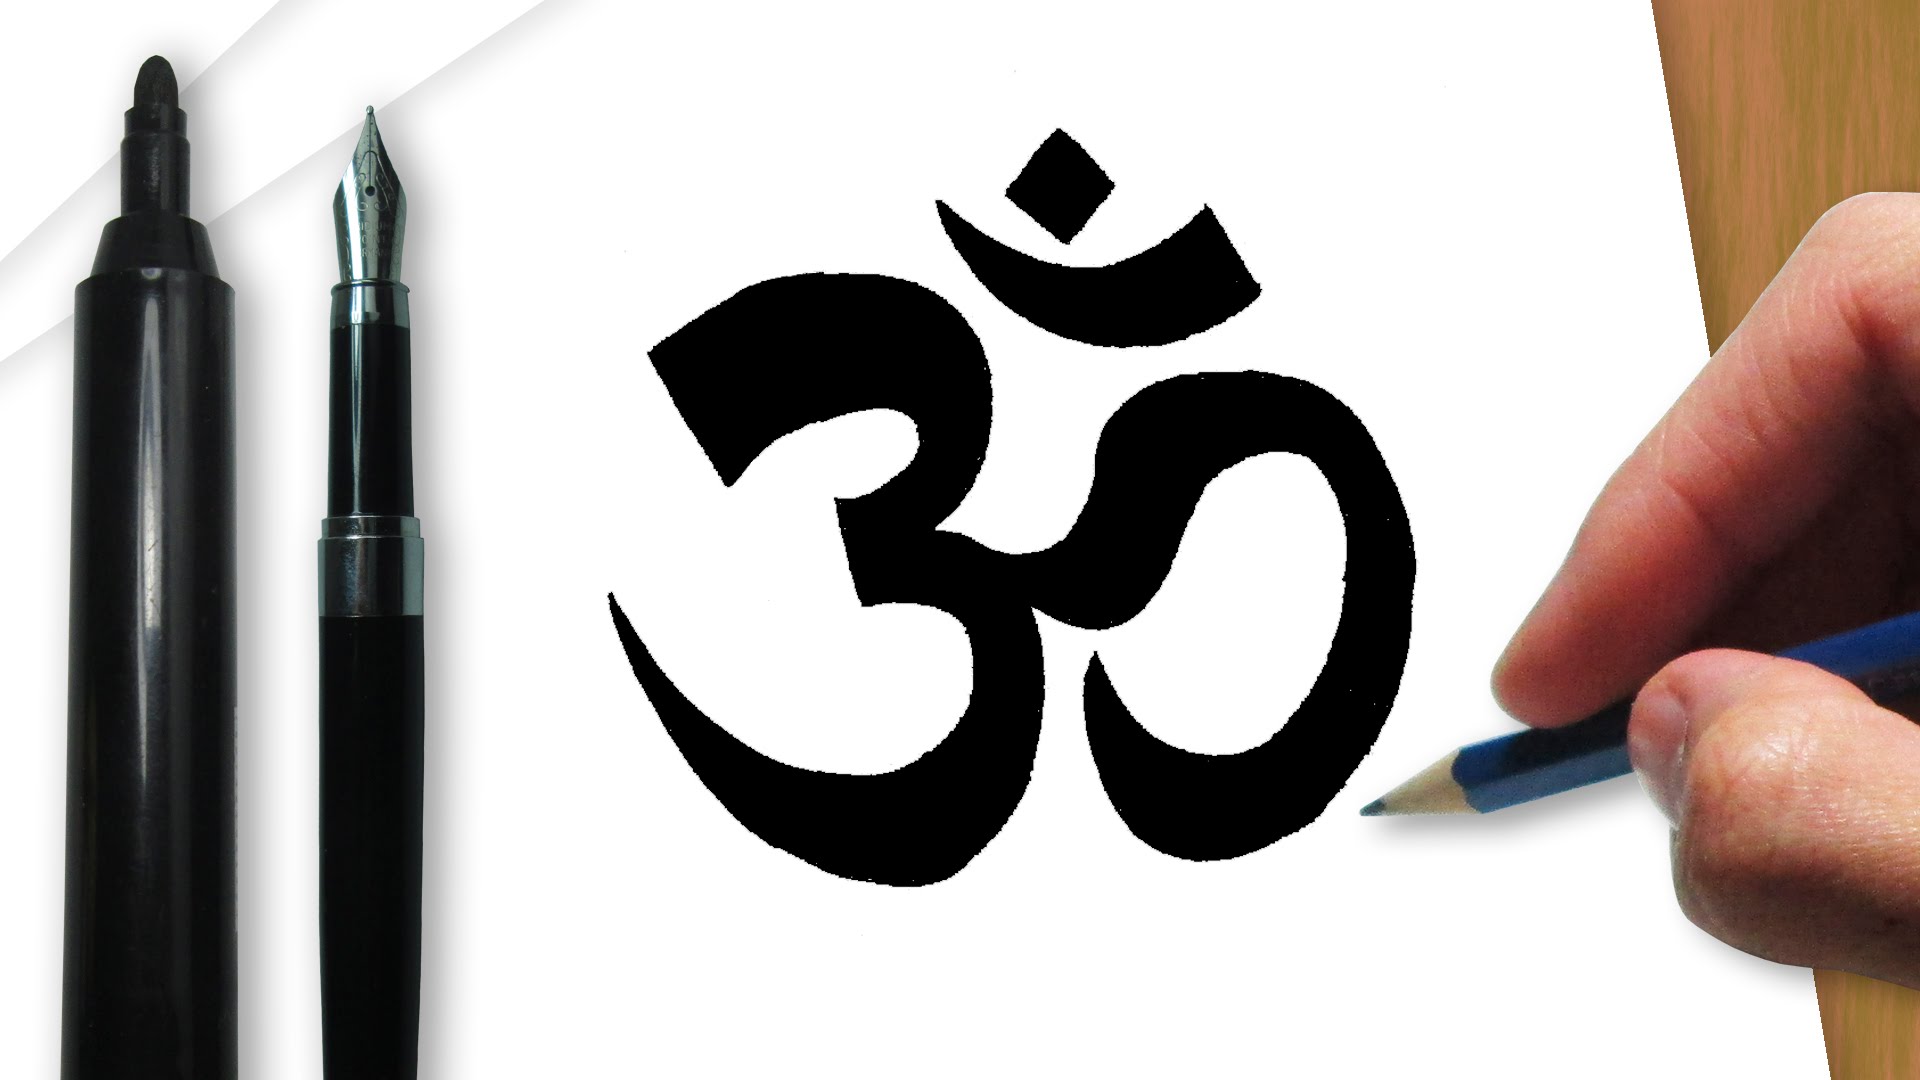 How to draw an Om Buddhist symbol - YouTube